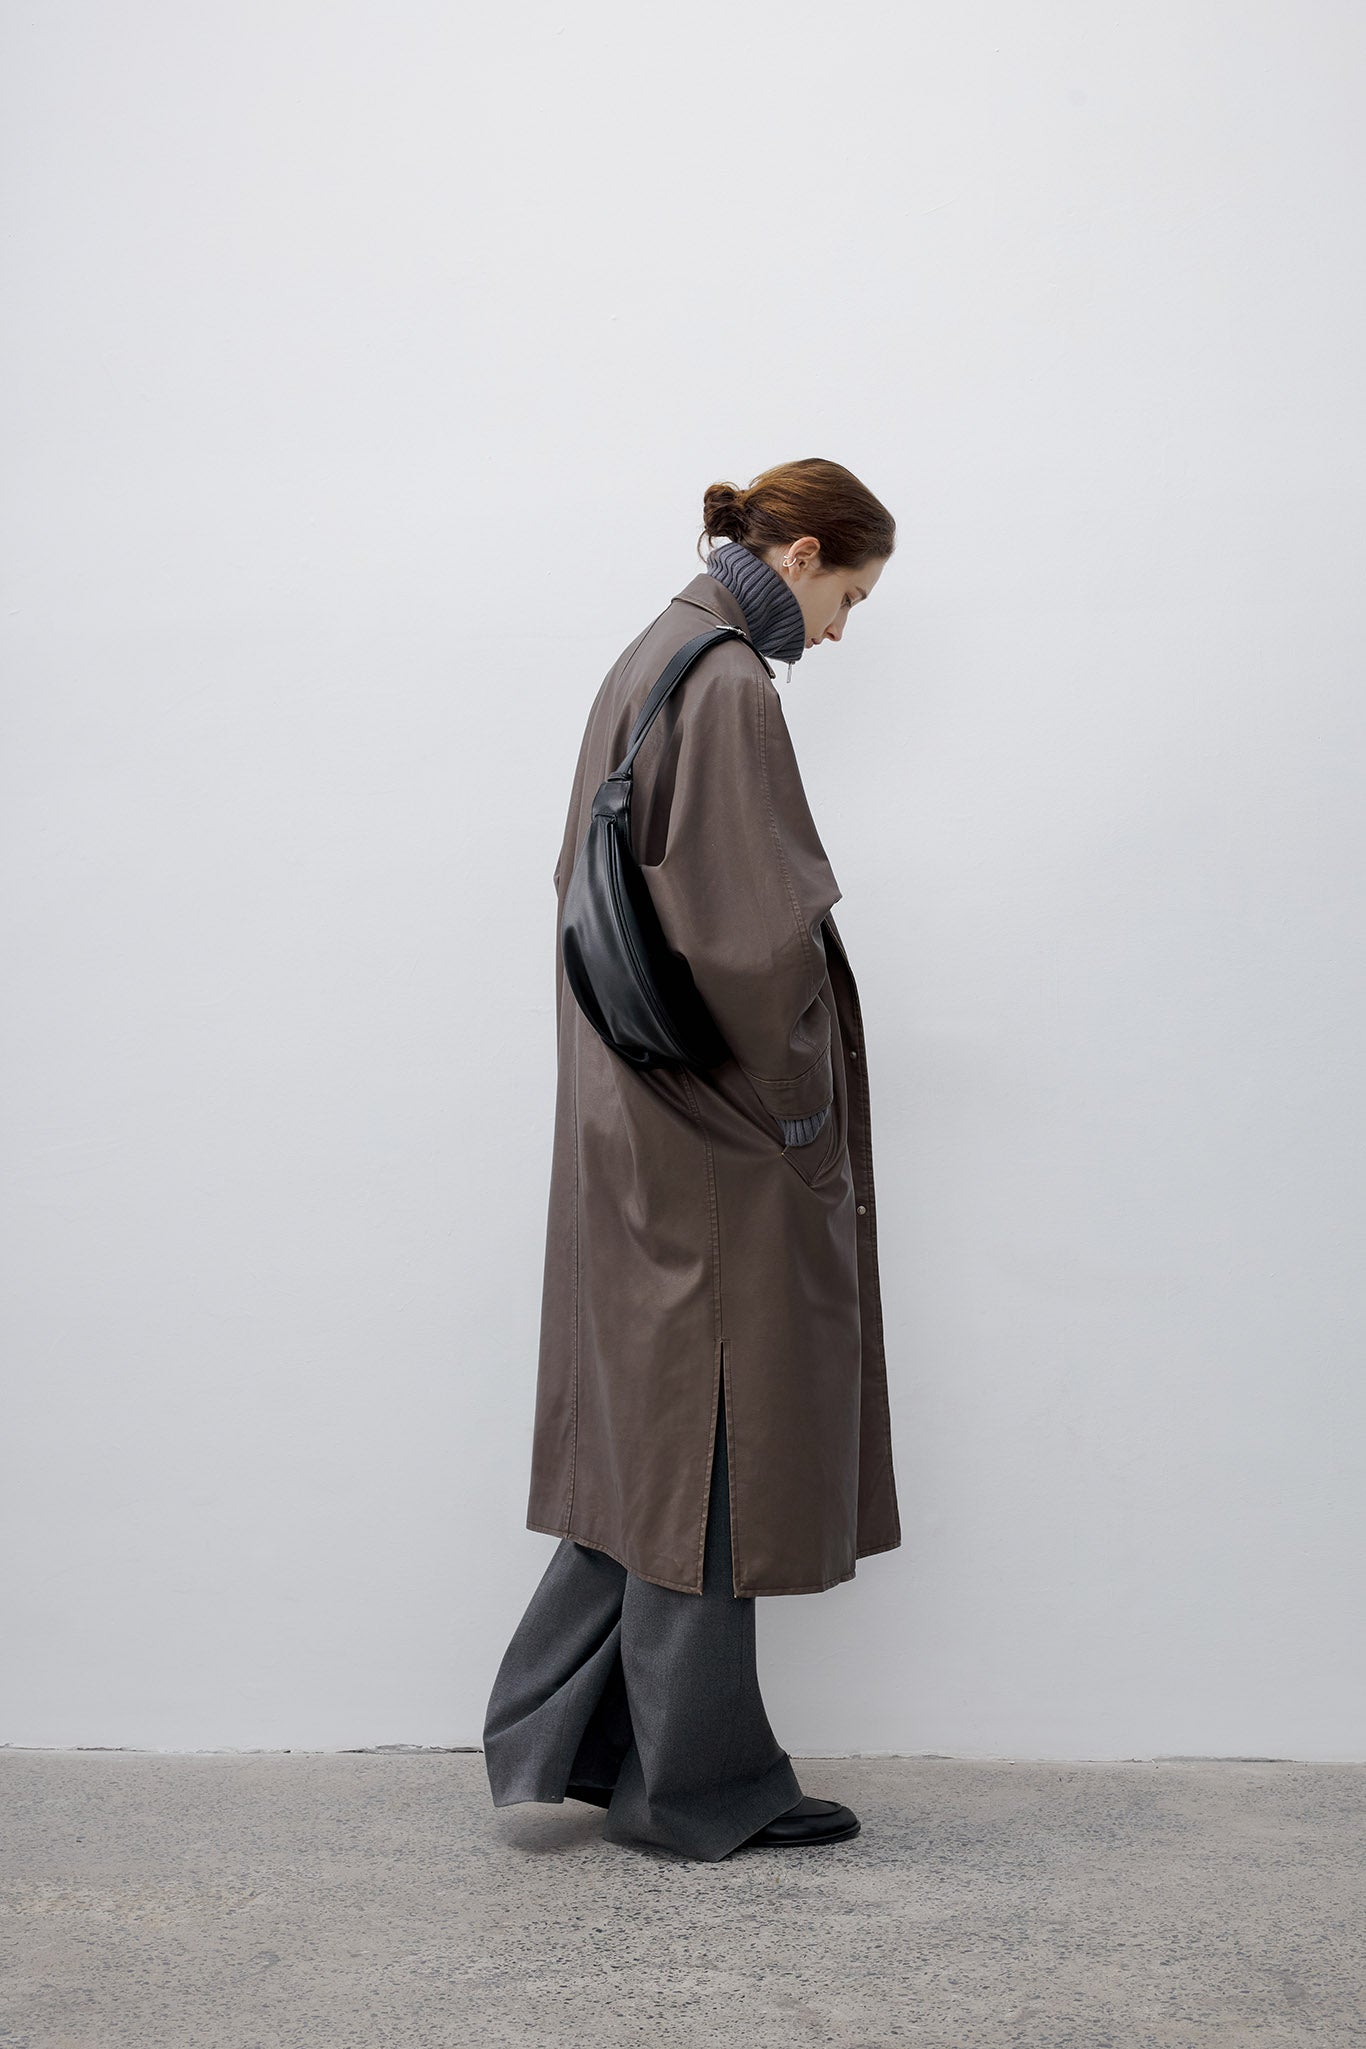 [tageechita] Over silhouette leather long coat